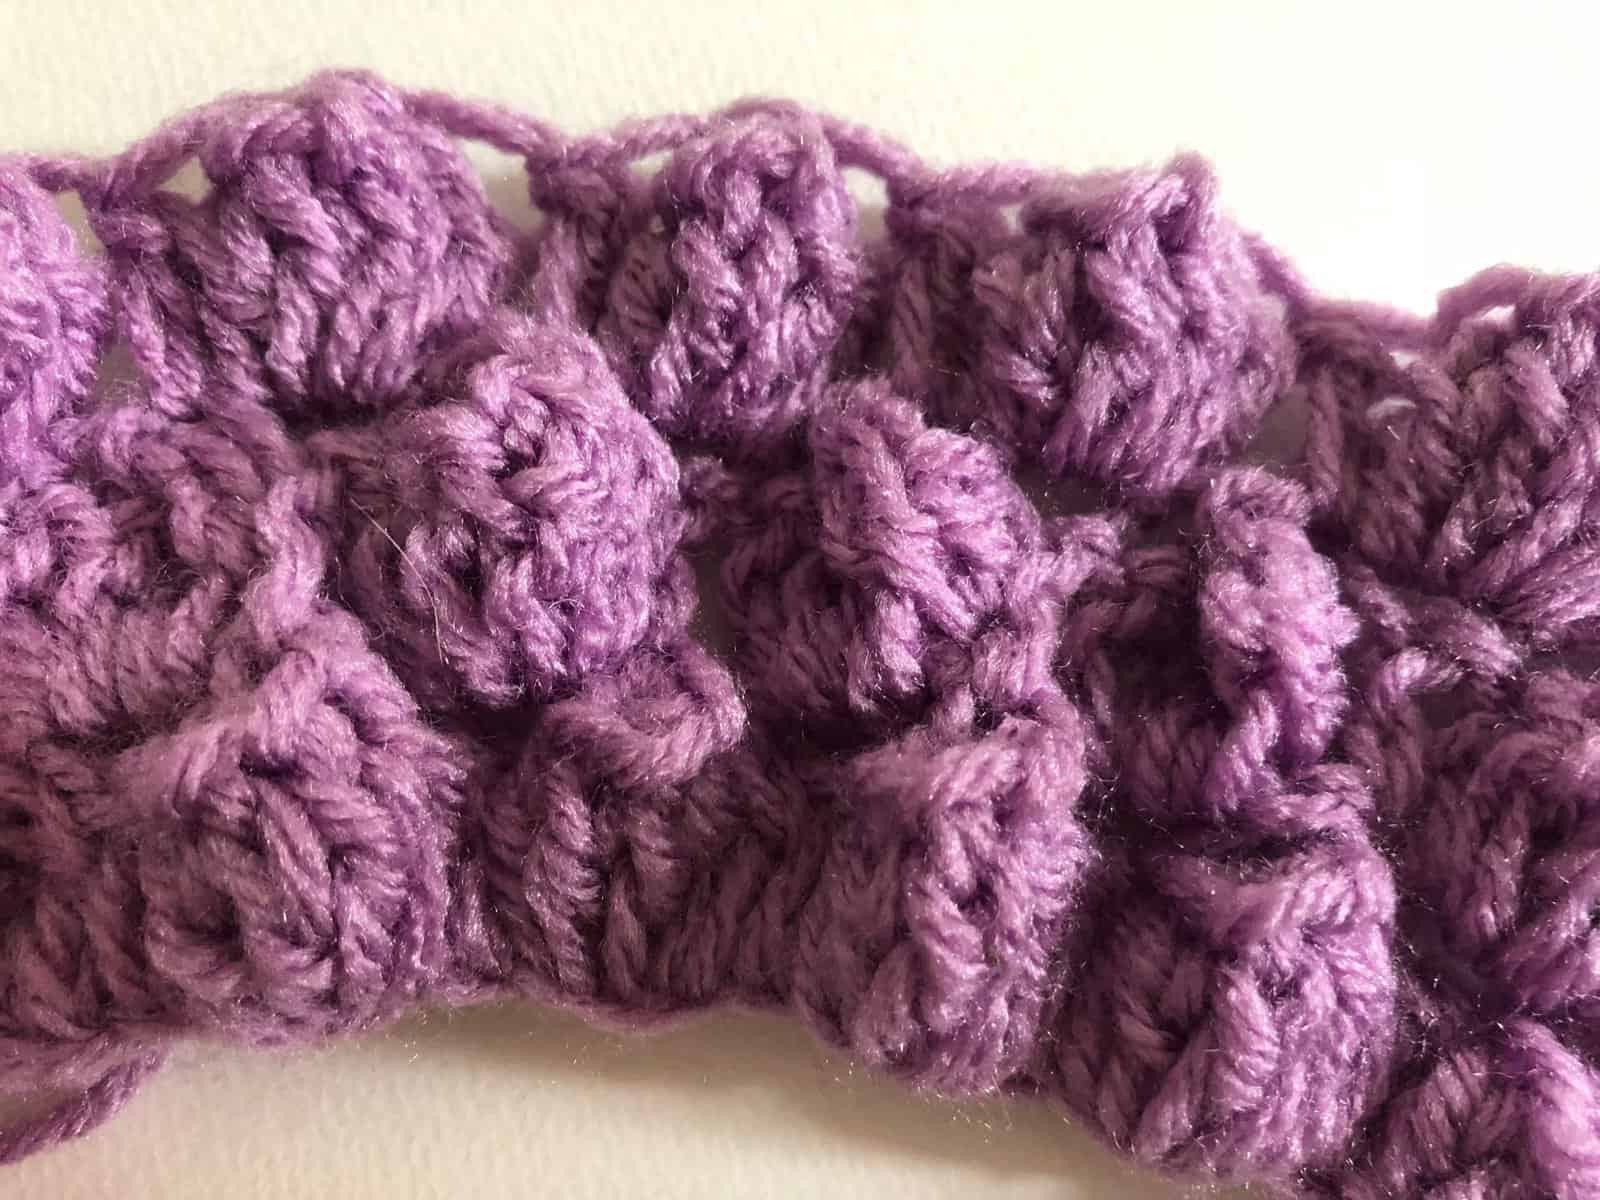 How to Crochet Popcorn Stitch – Crochet Patterns, How to, Stitches